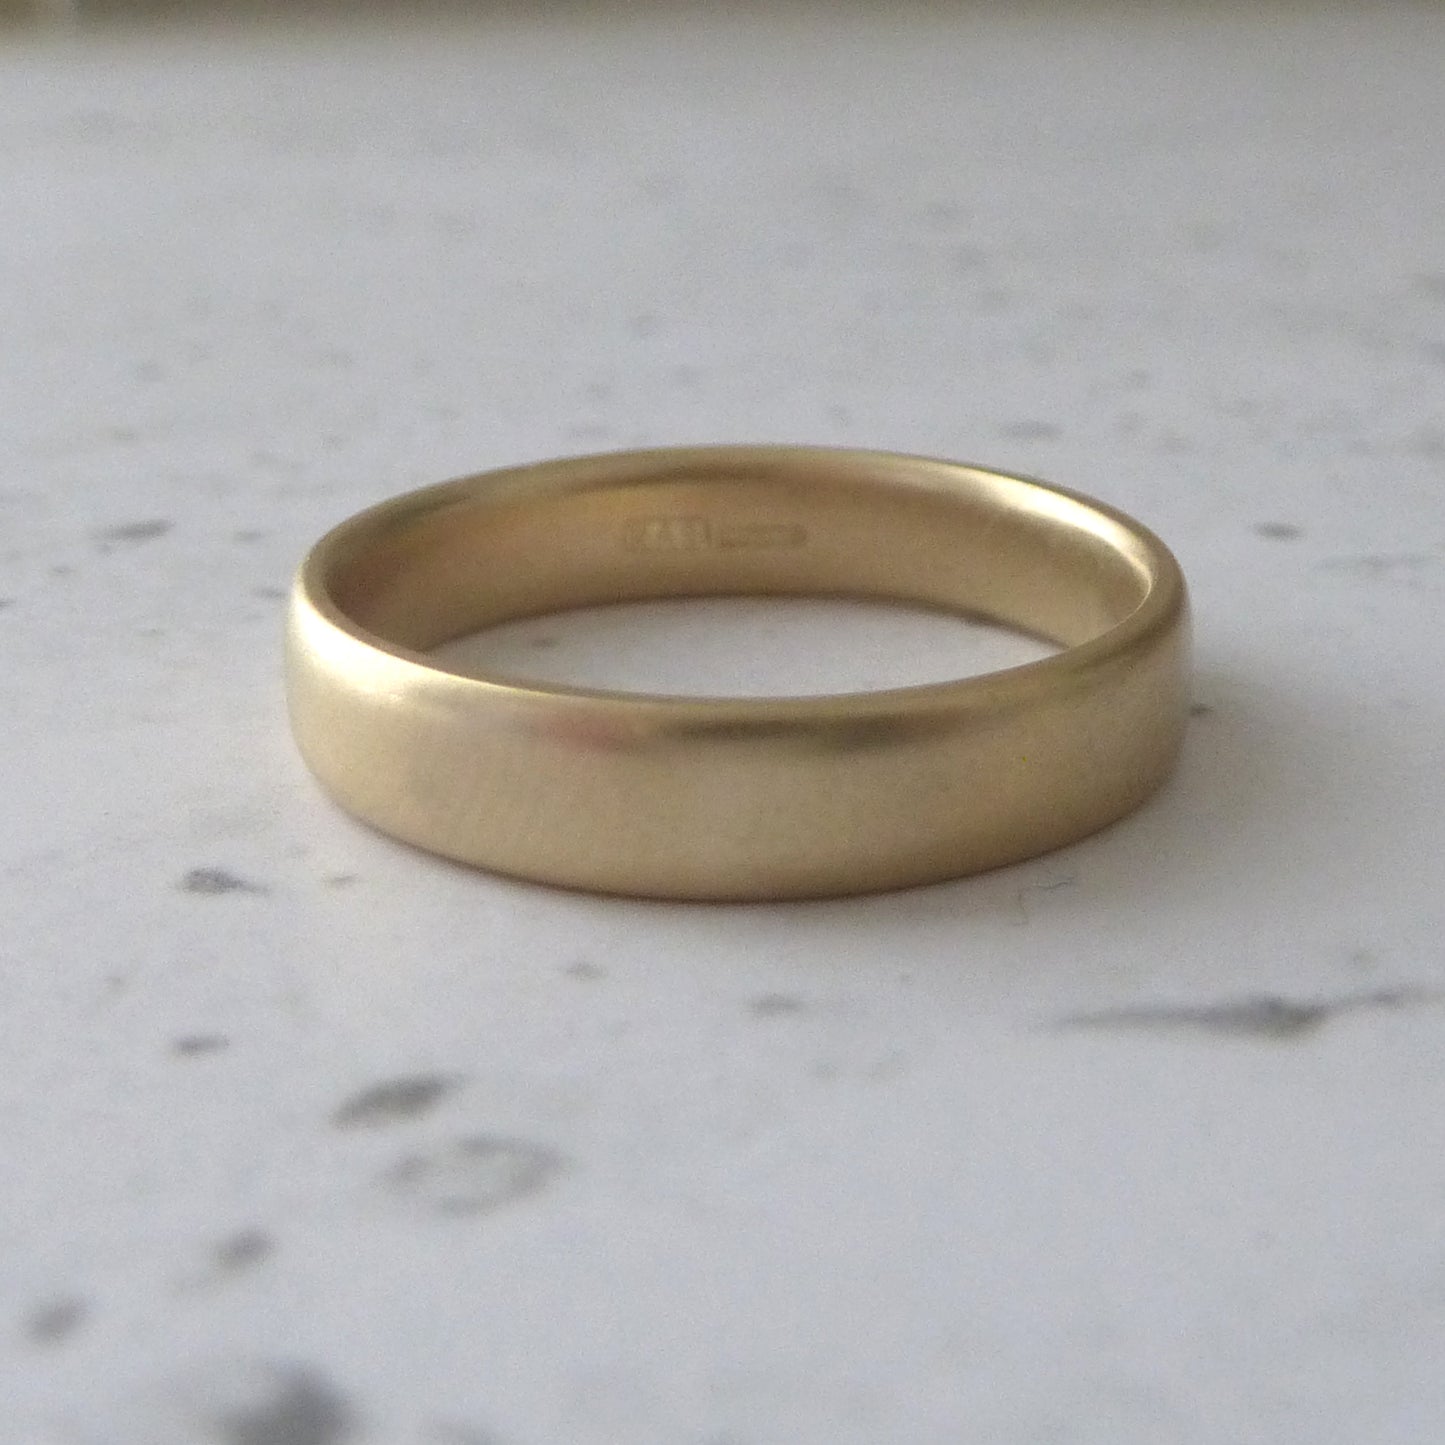 Smooth finish hand made wedding band, 9ct yellow recycled gold, satin finish